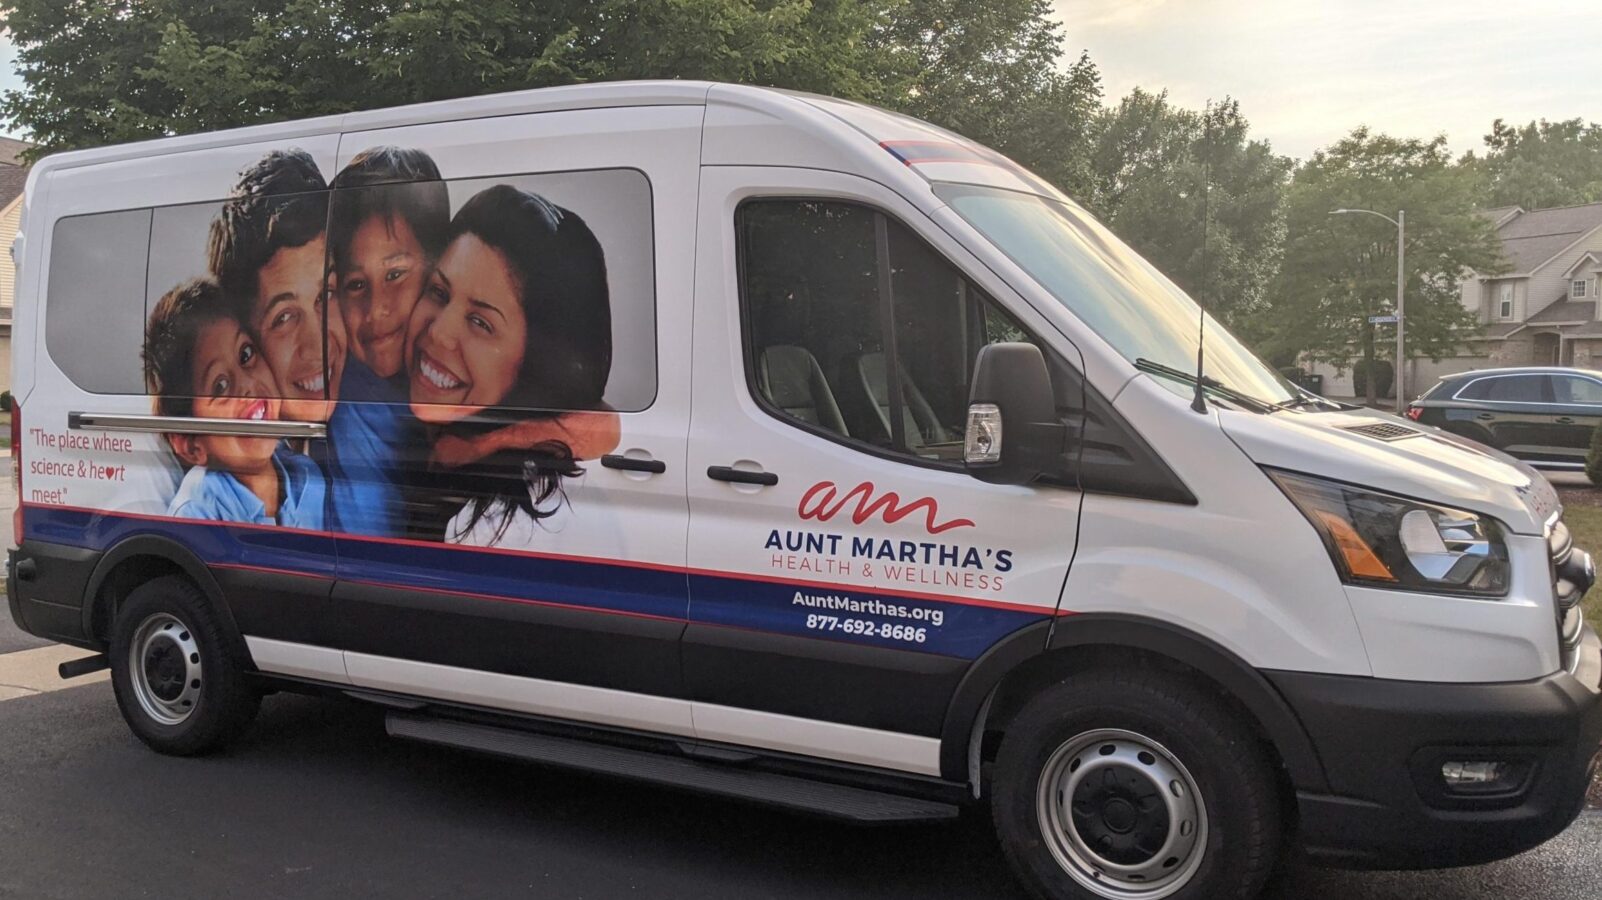 Aunt Martha’s mobile unit offers free COVID-19 testing